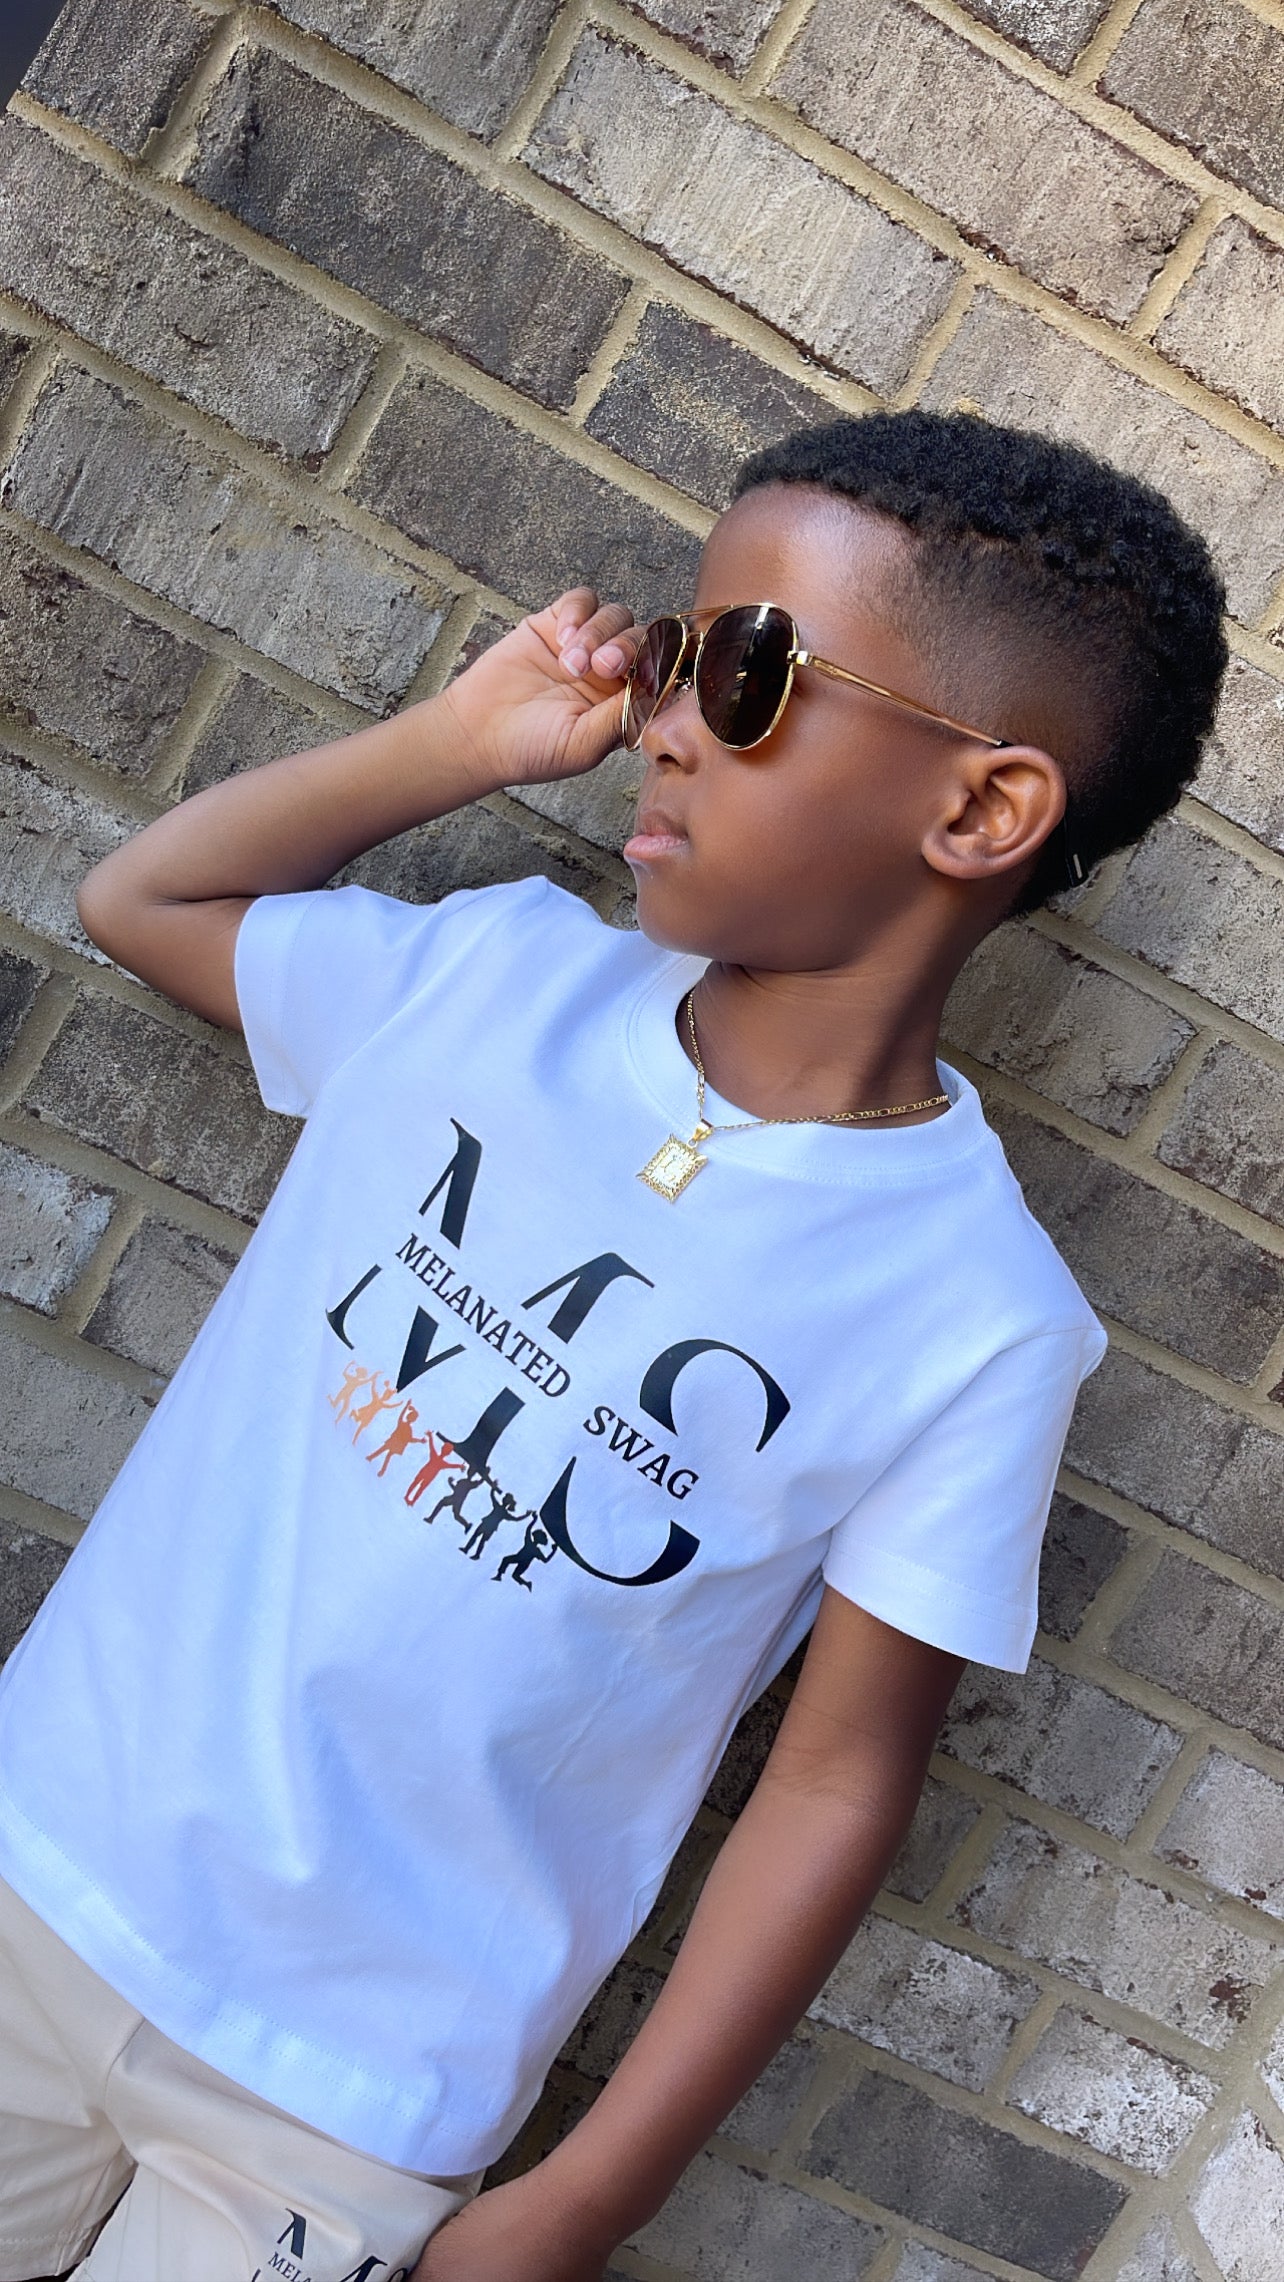 Lightly Melanated Hella Black Kids T-Shirt for Sale by BAISSANE